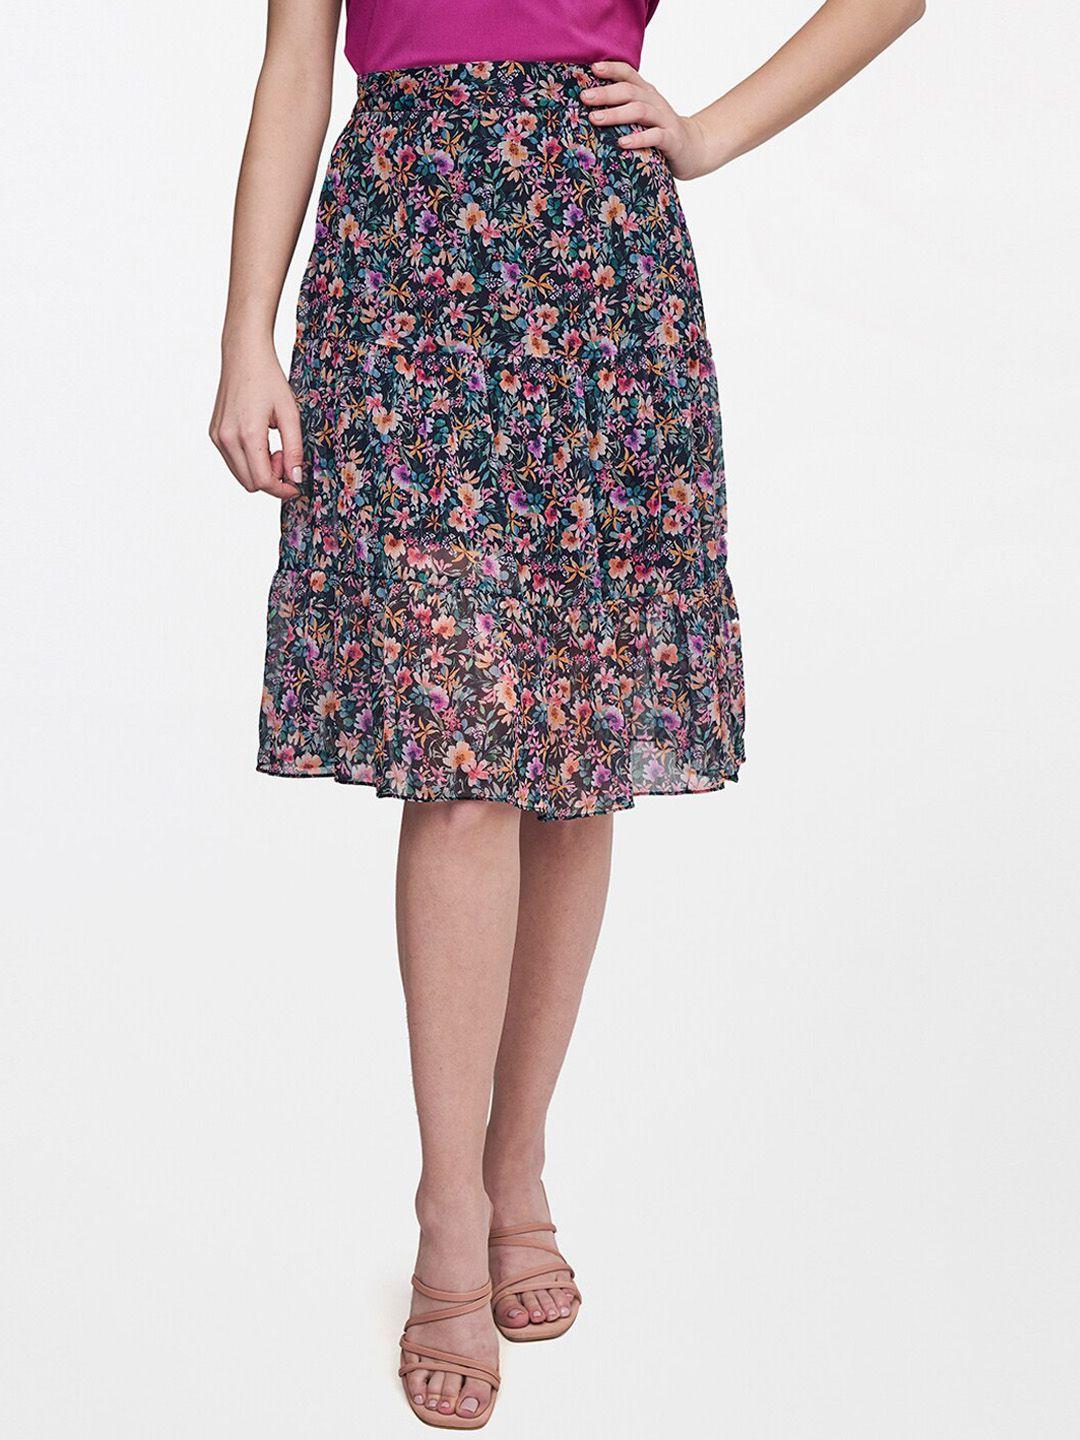 and-women-purple-&-black-printed-flared-skirts